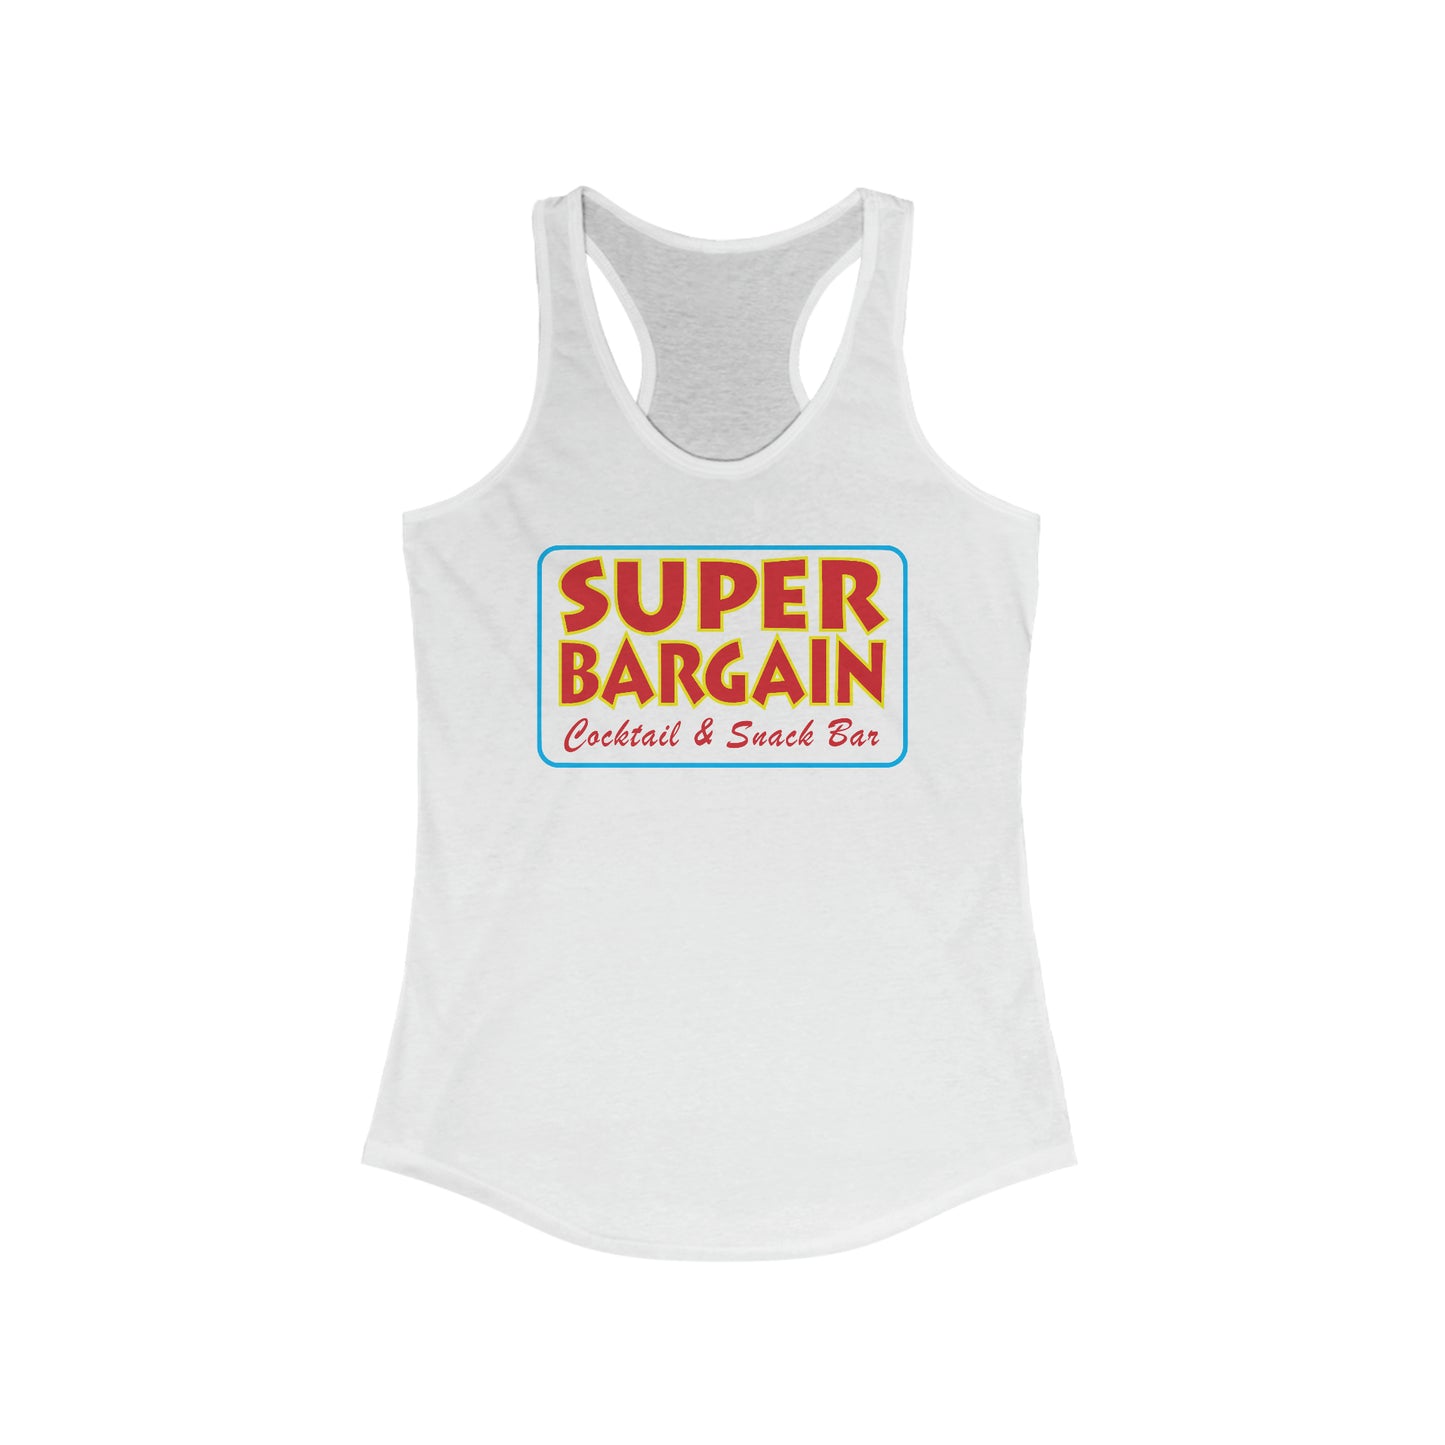 A Printify Women's Logo Racerback Tank with a colorful logo that reads "SUPER BARGAIN, Cocktail & Snack Bar" in red, yellow, and green text on the chest, featuring a subtle nod to Toronto's Cabbagetown.